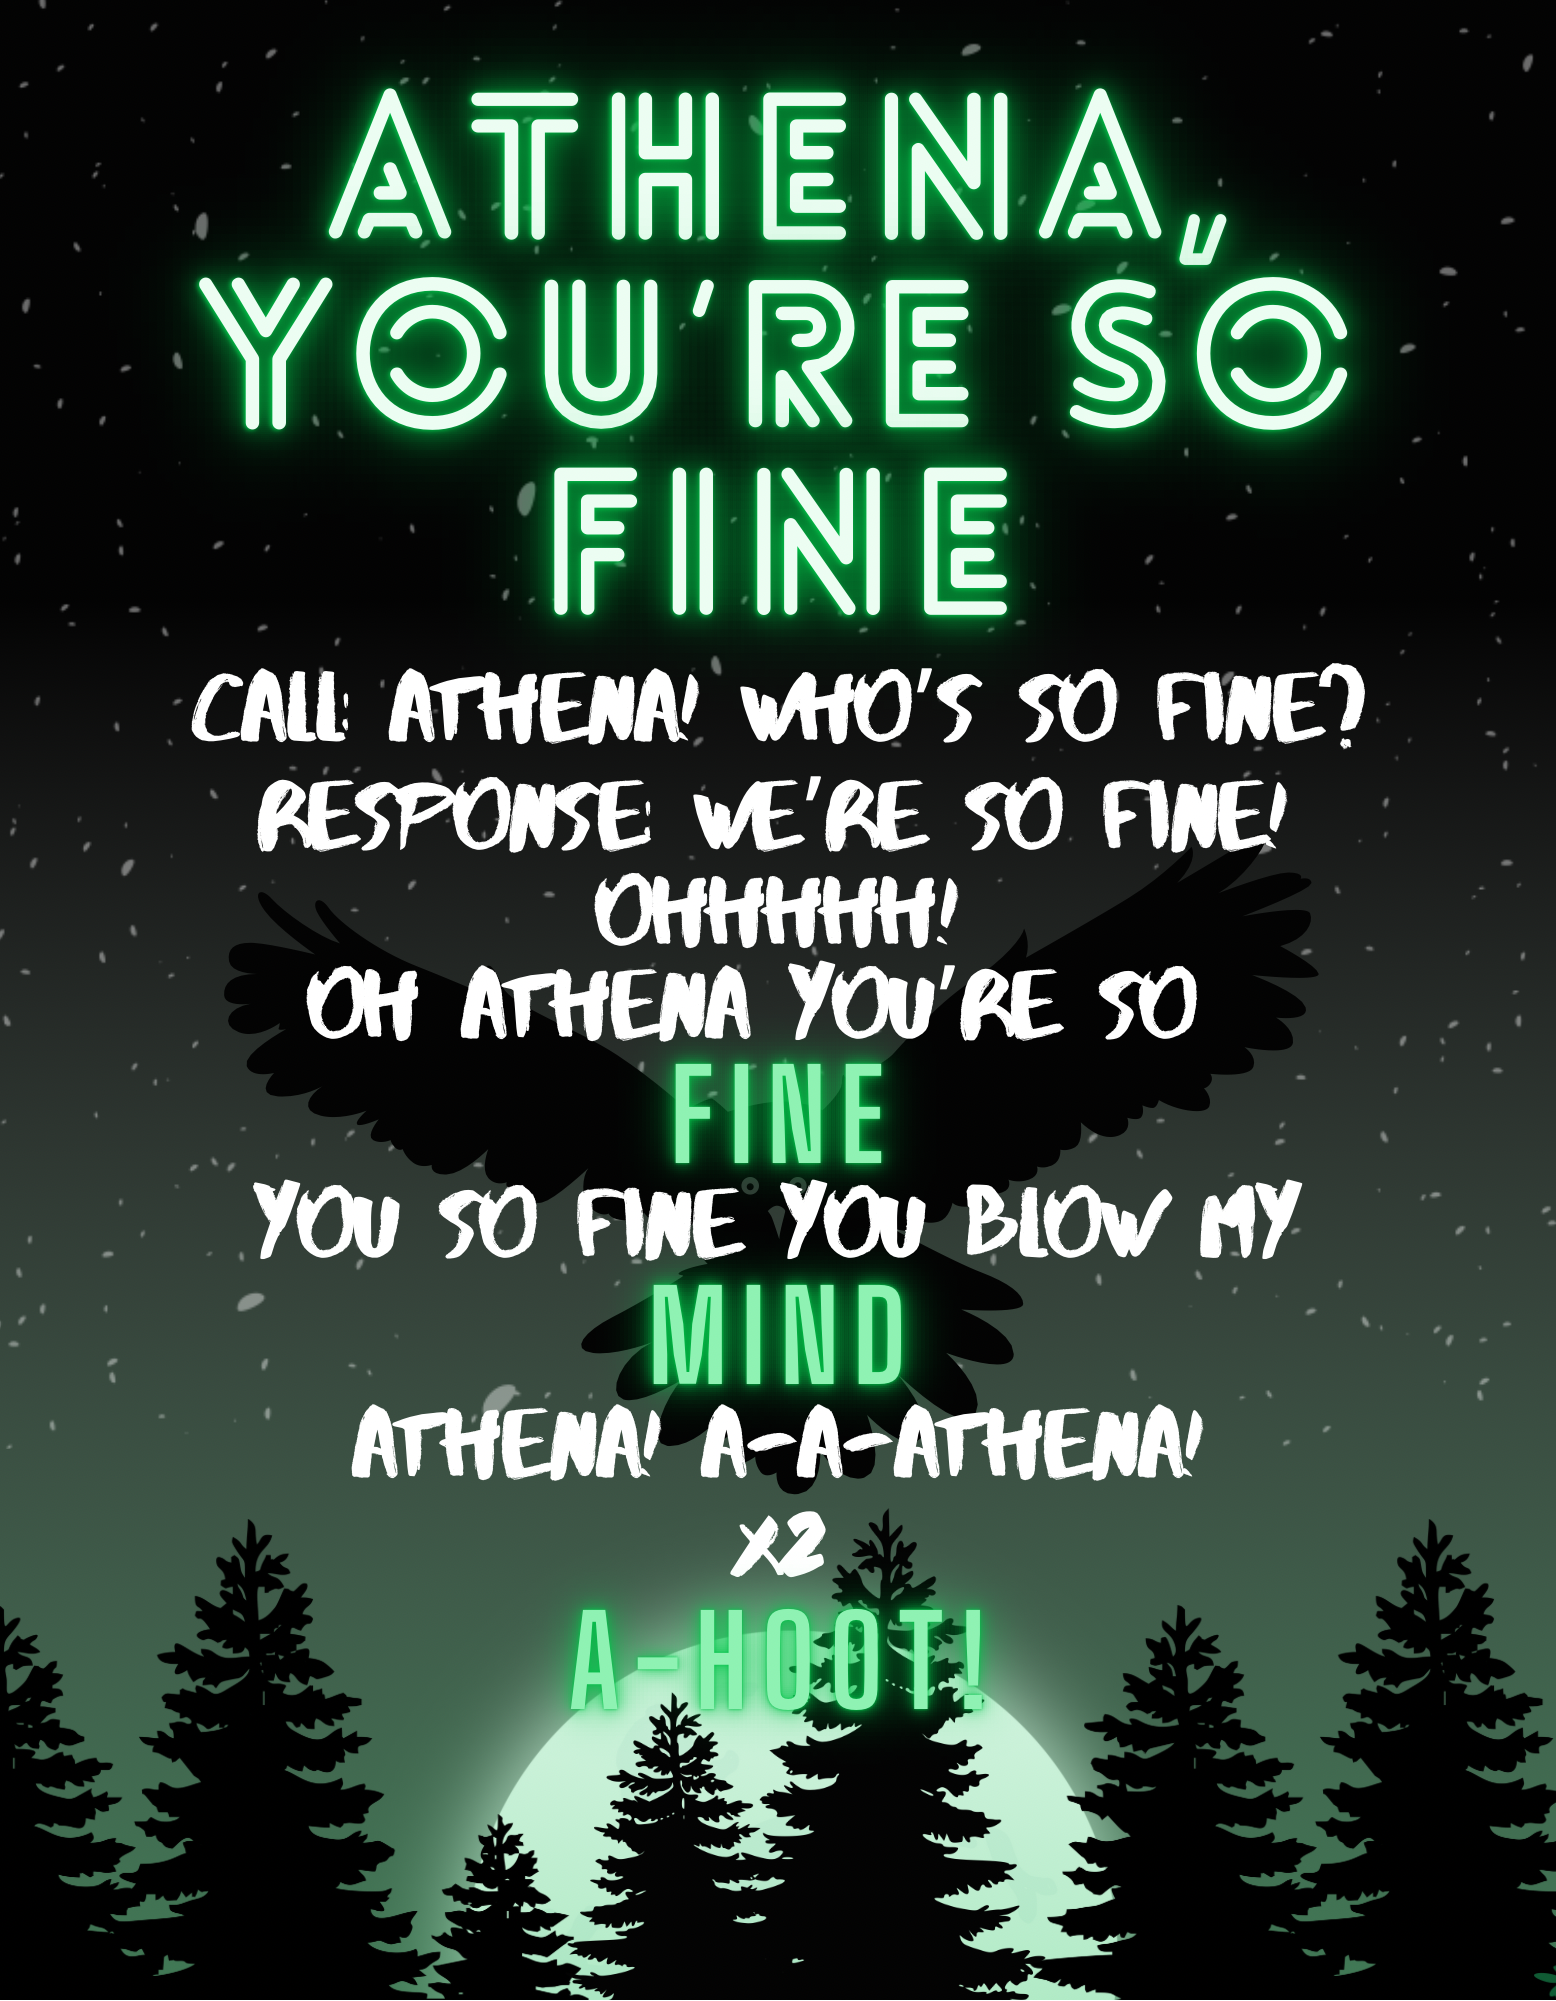 Athena_Faculty Cheers_Athena You_re So Fine.png